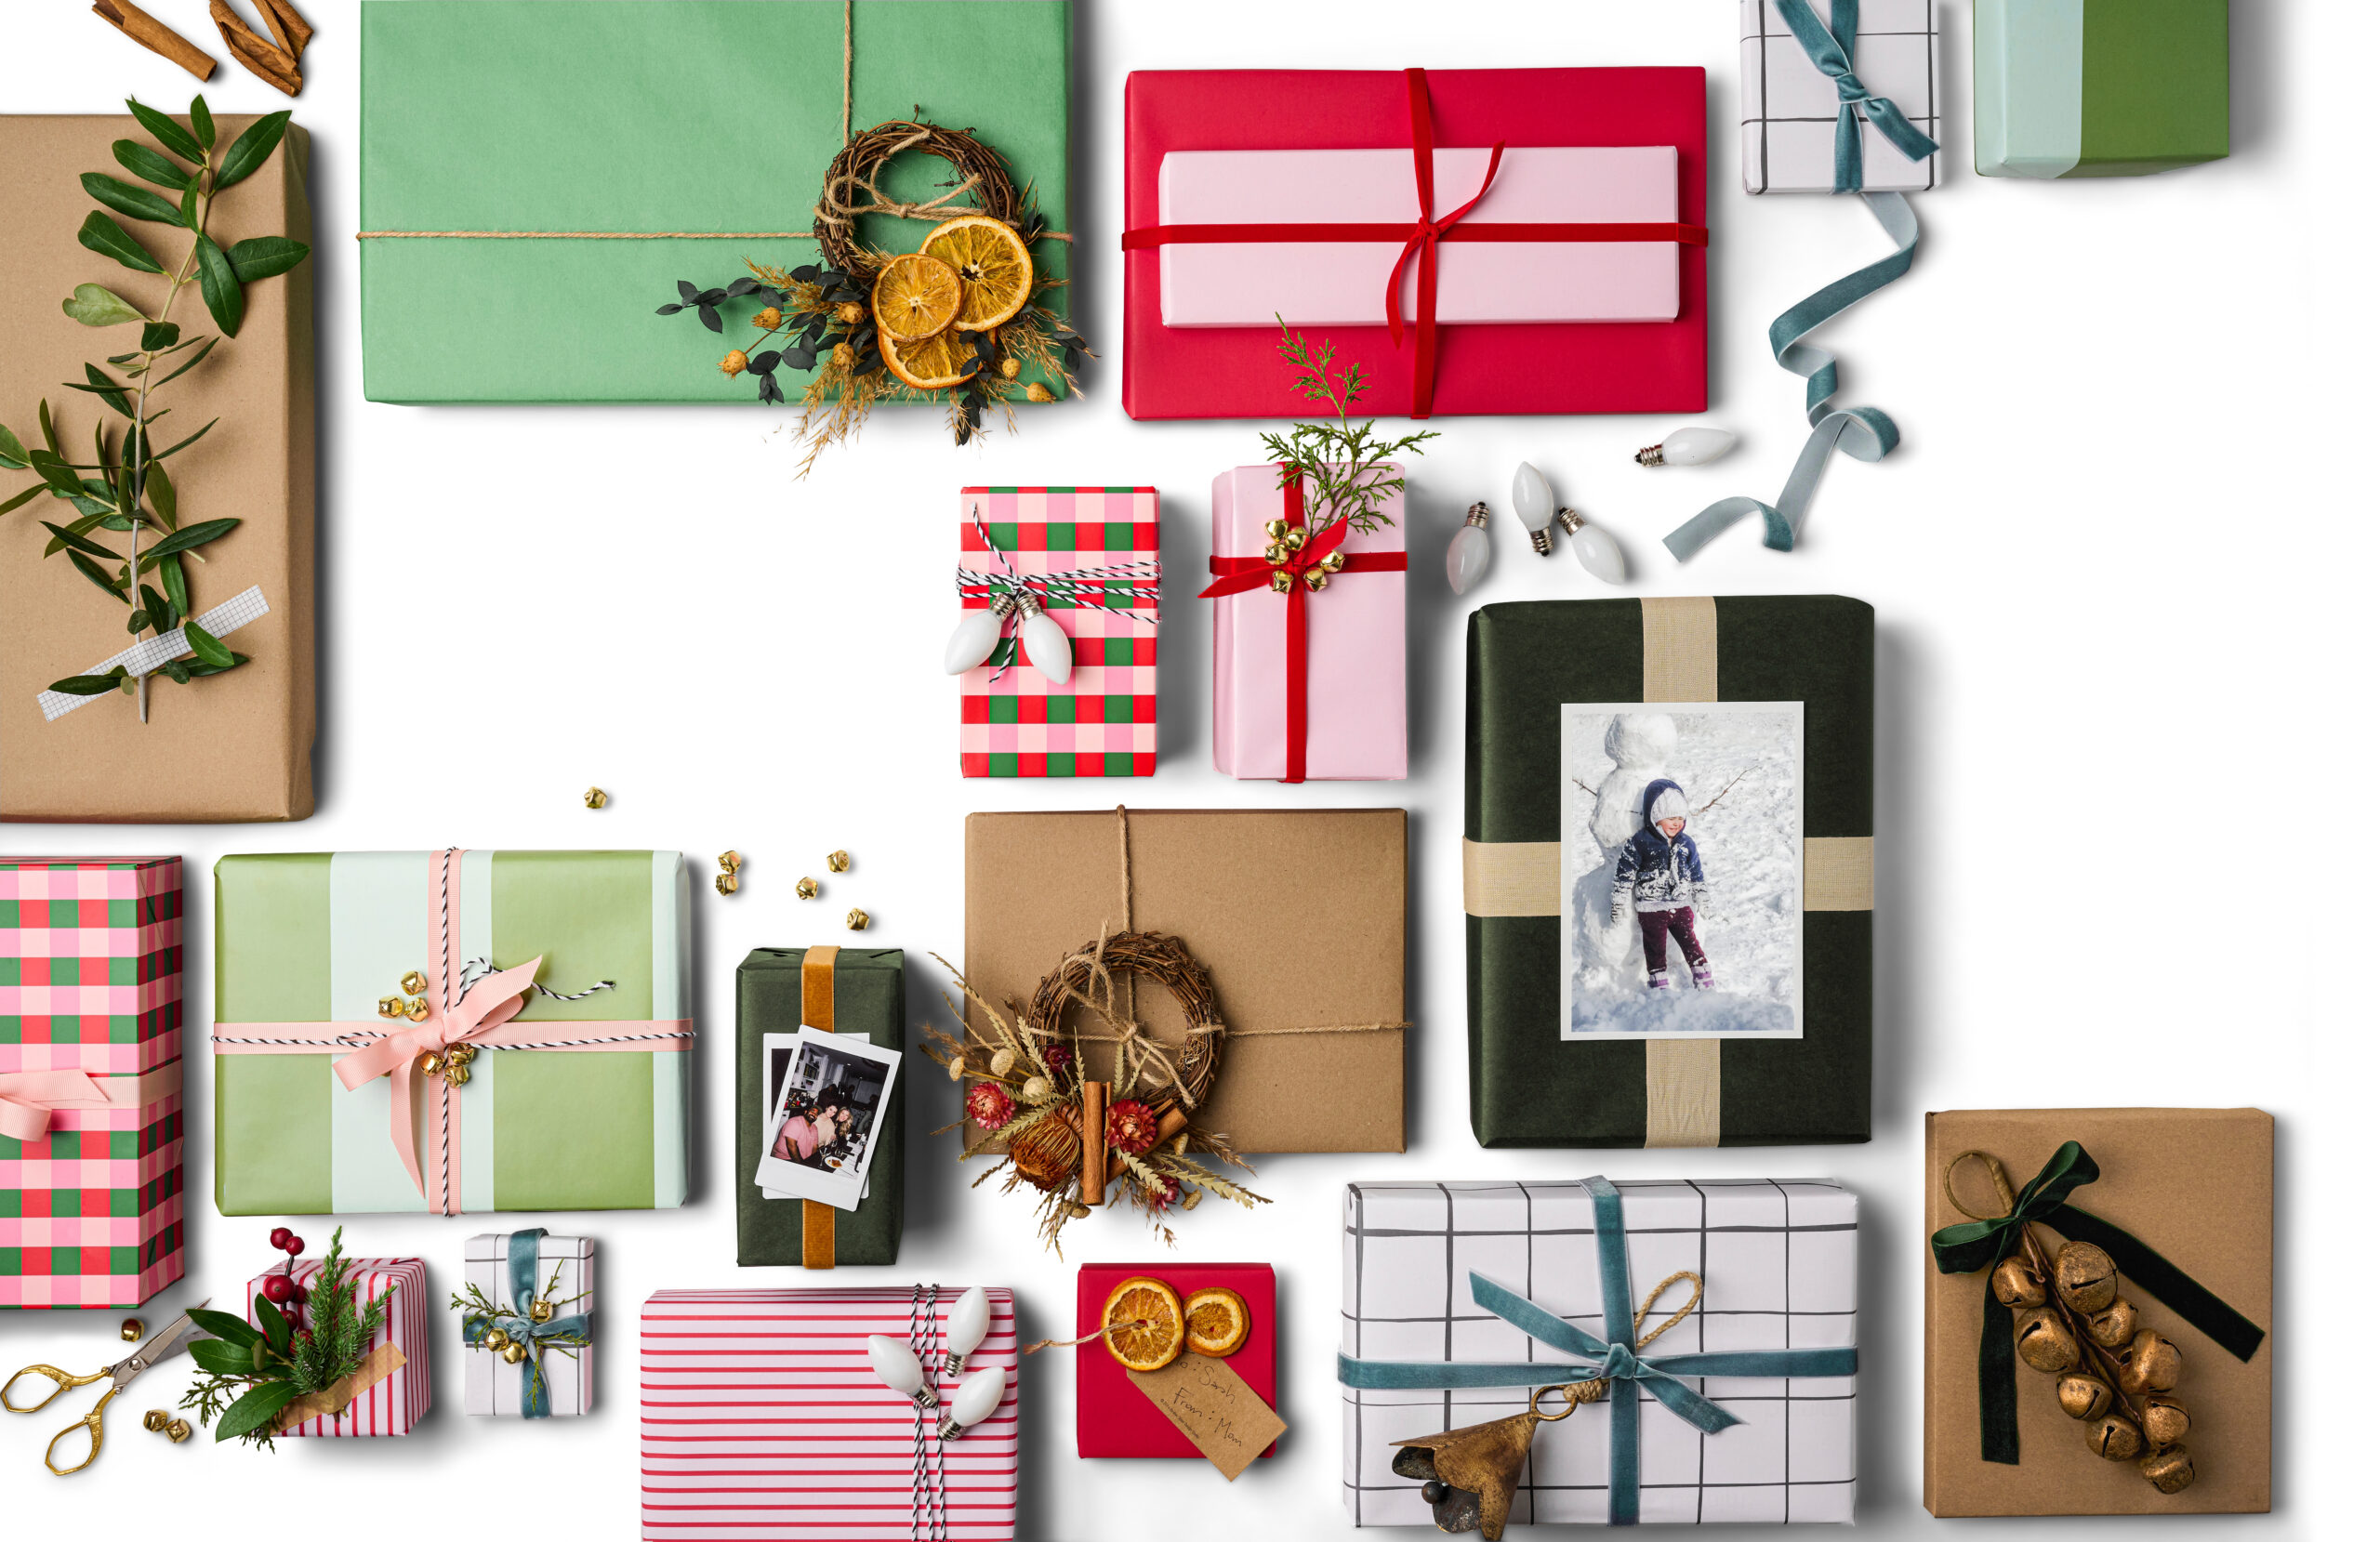 https://res.cloudinary.com/social-upload-prod-home-media-cld/image/upload/magnolia-wordpress/2022/11/TMJ_GiftToppers_Winter22_001_preview-scaled.jpg